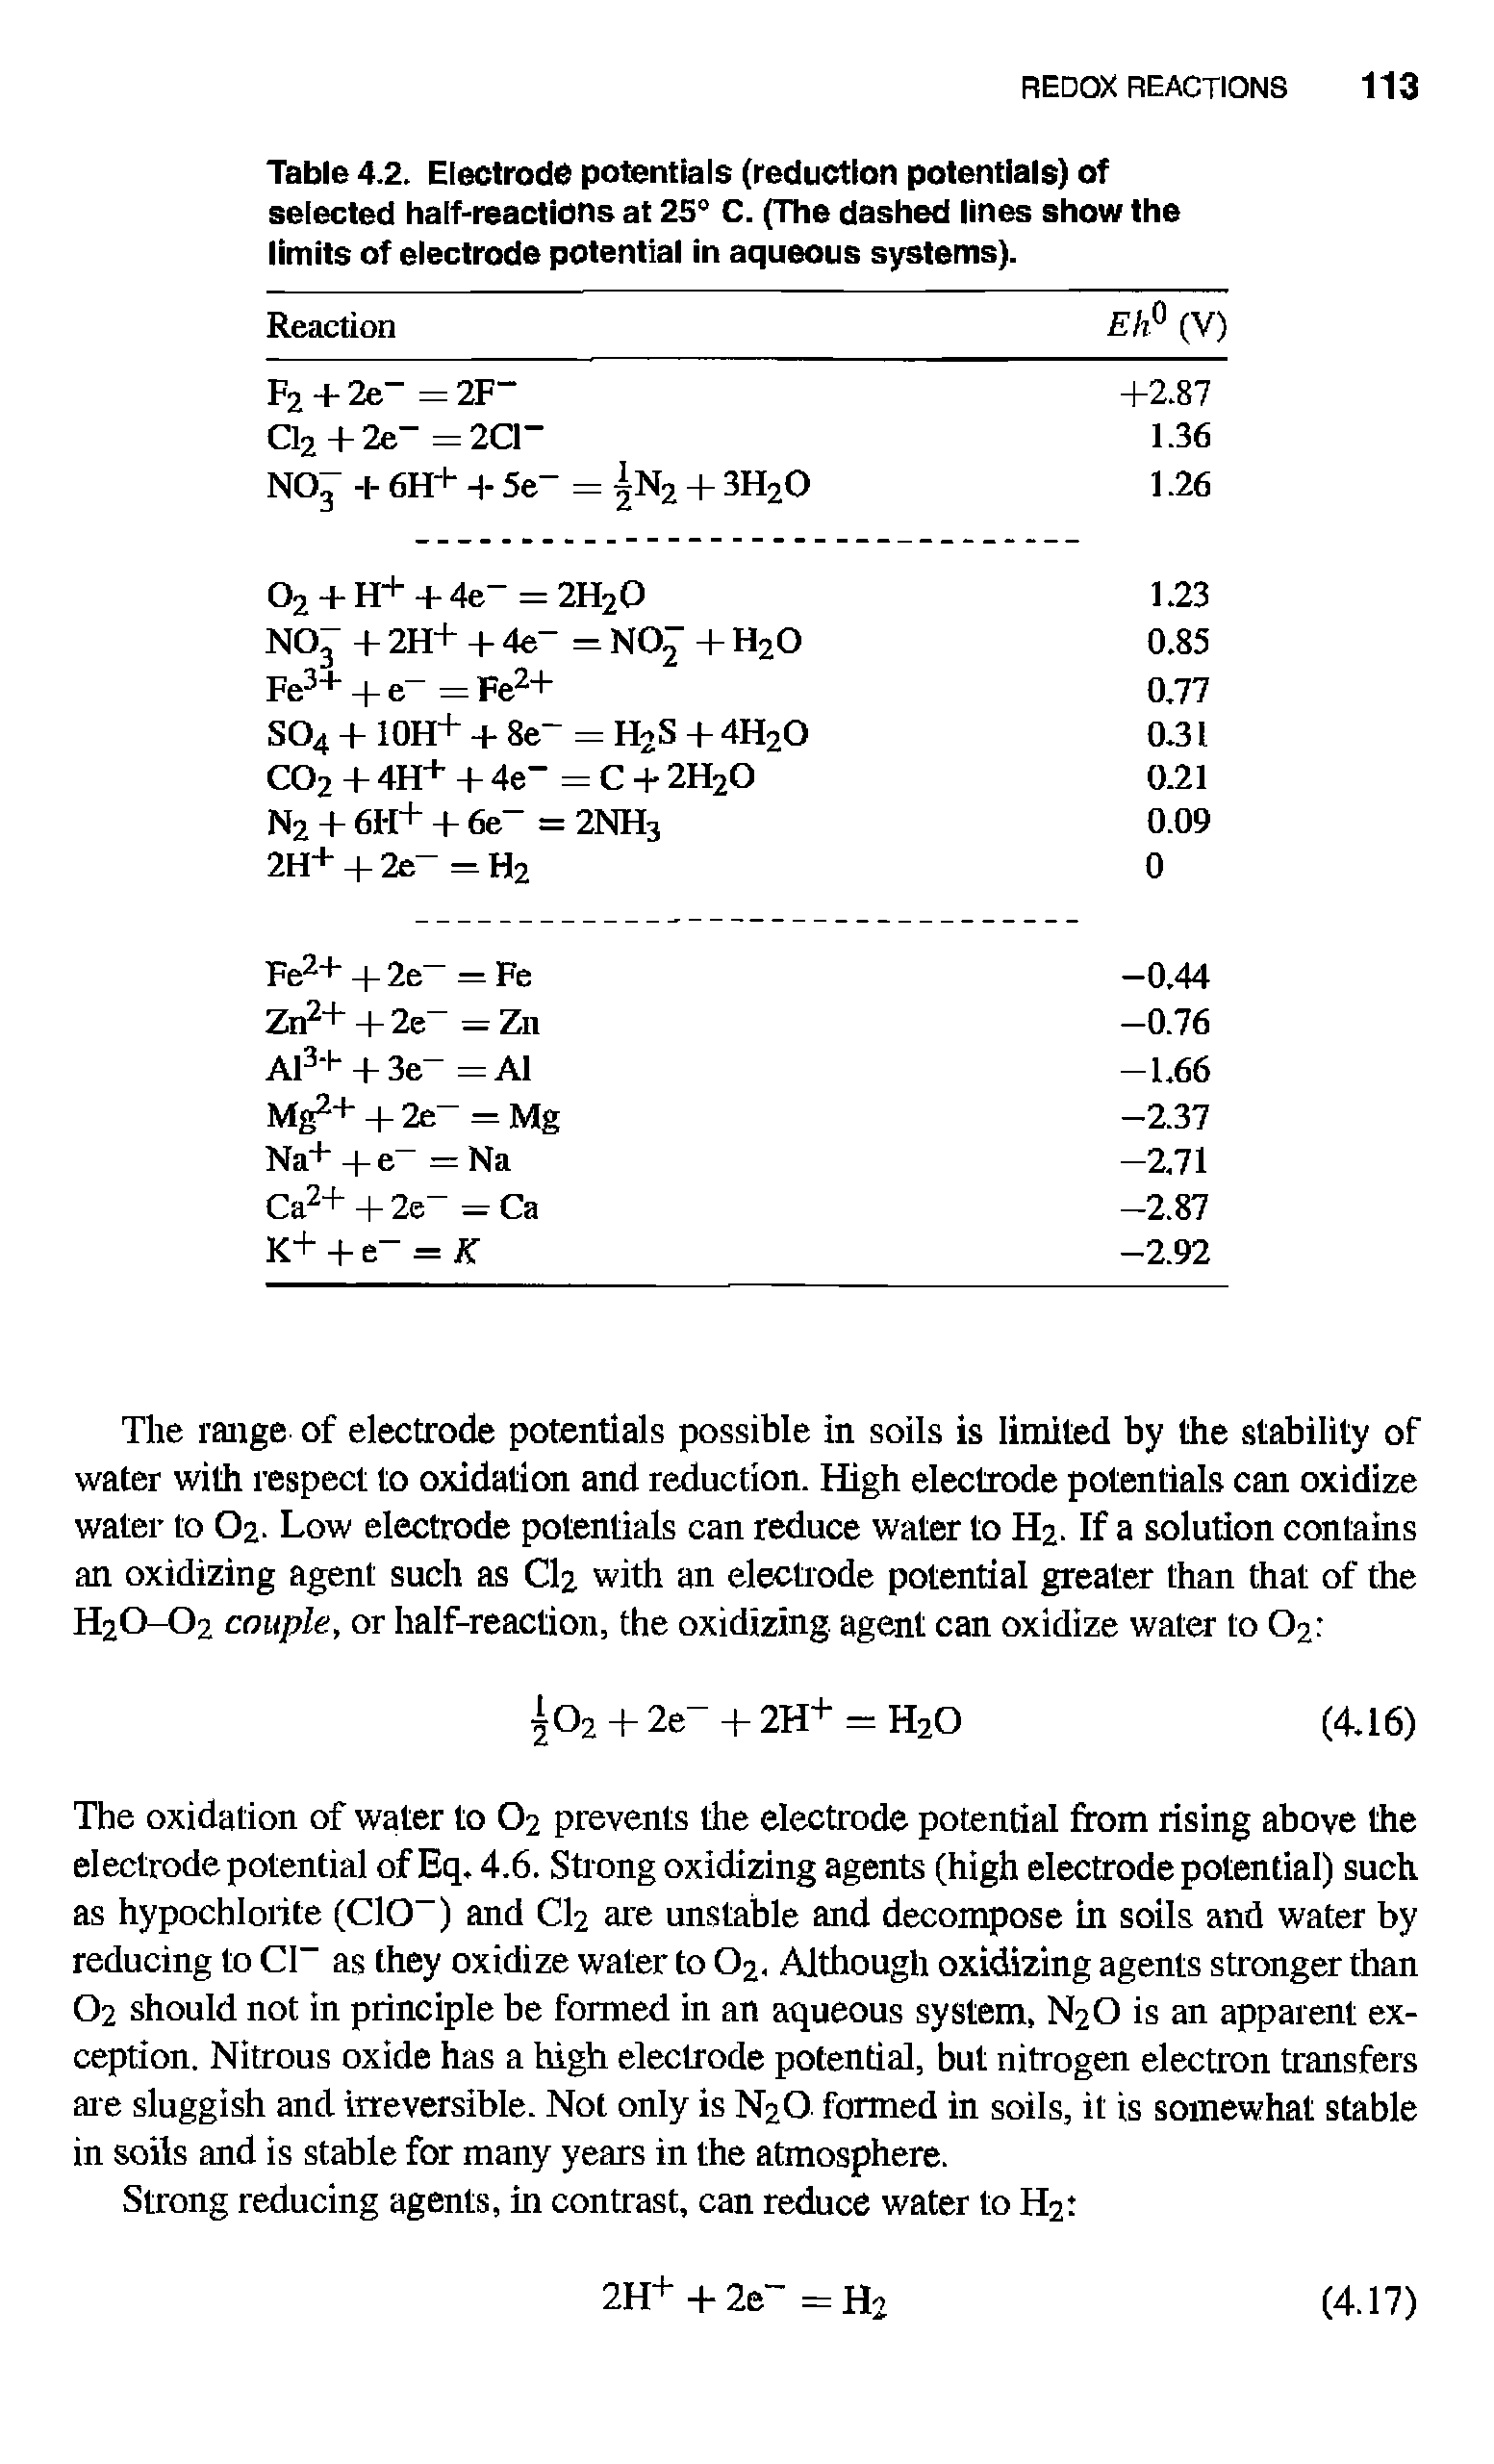 Table 4.2. Electrode potentials (reduction potentials) of selected half-reactions at 25° C. (The dashed lines show the limits of electrode potential in aqueous systems).